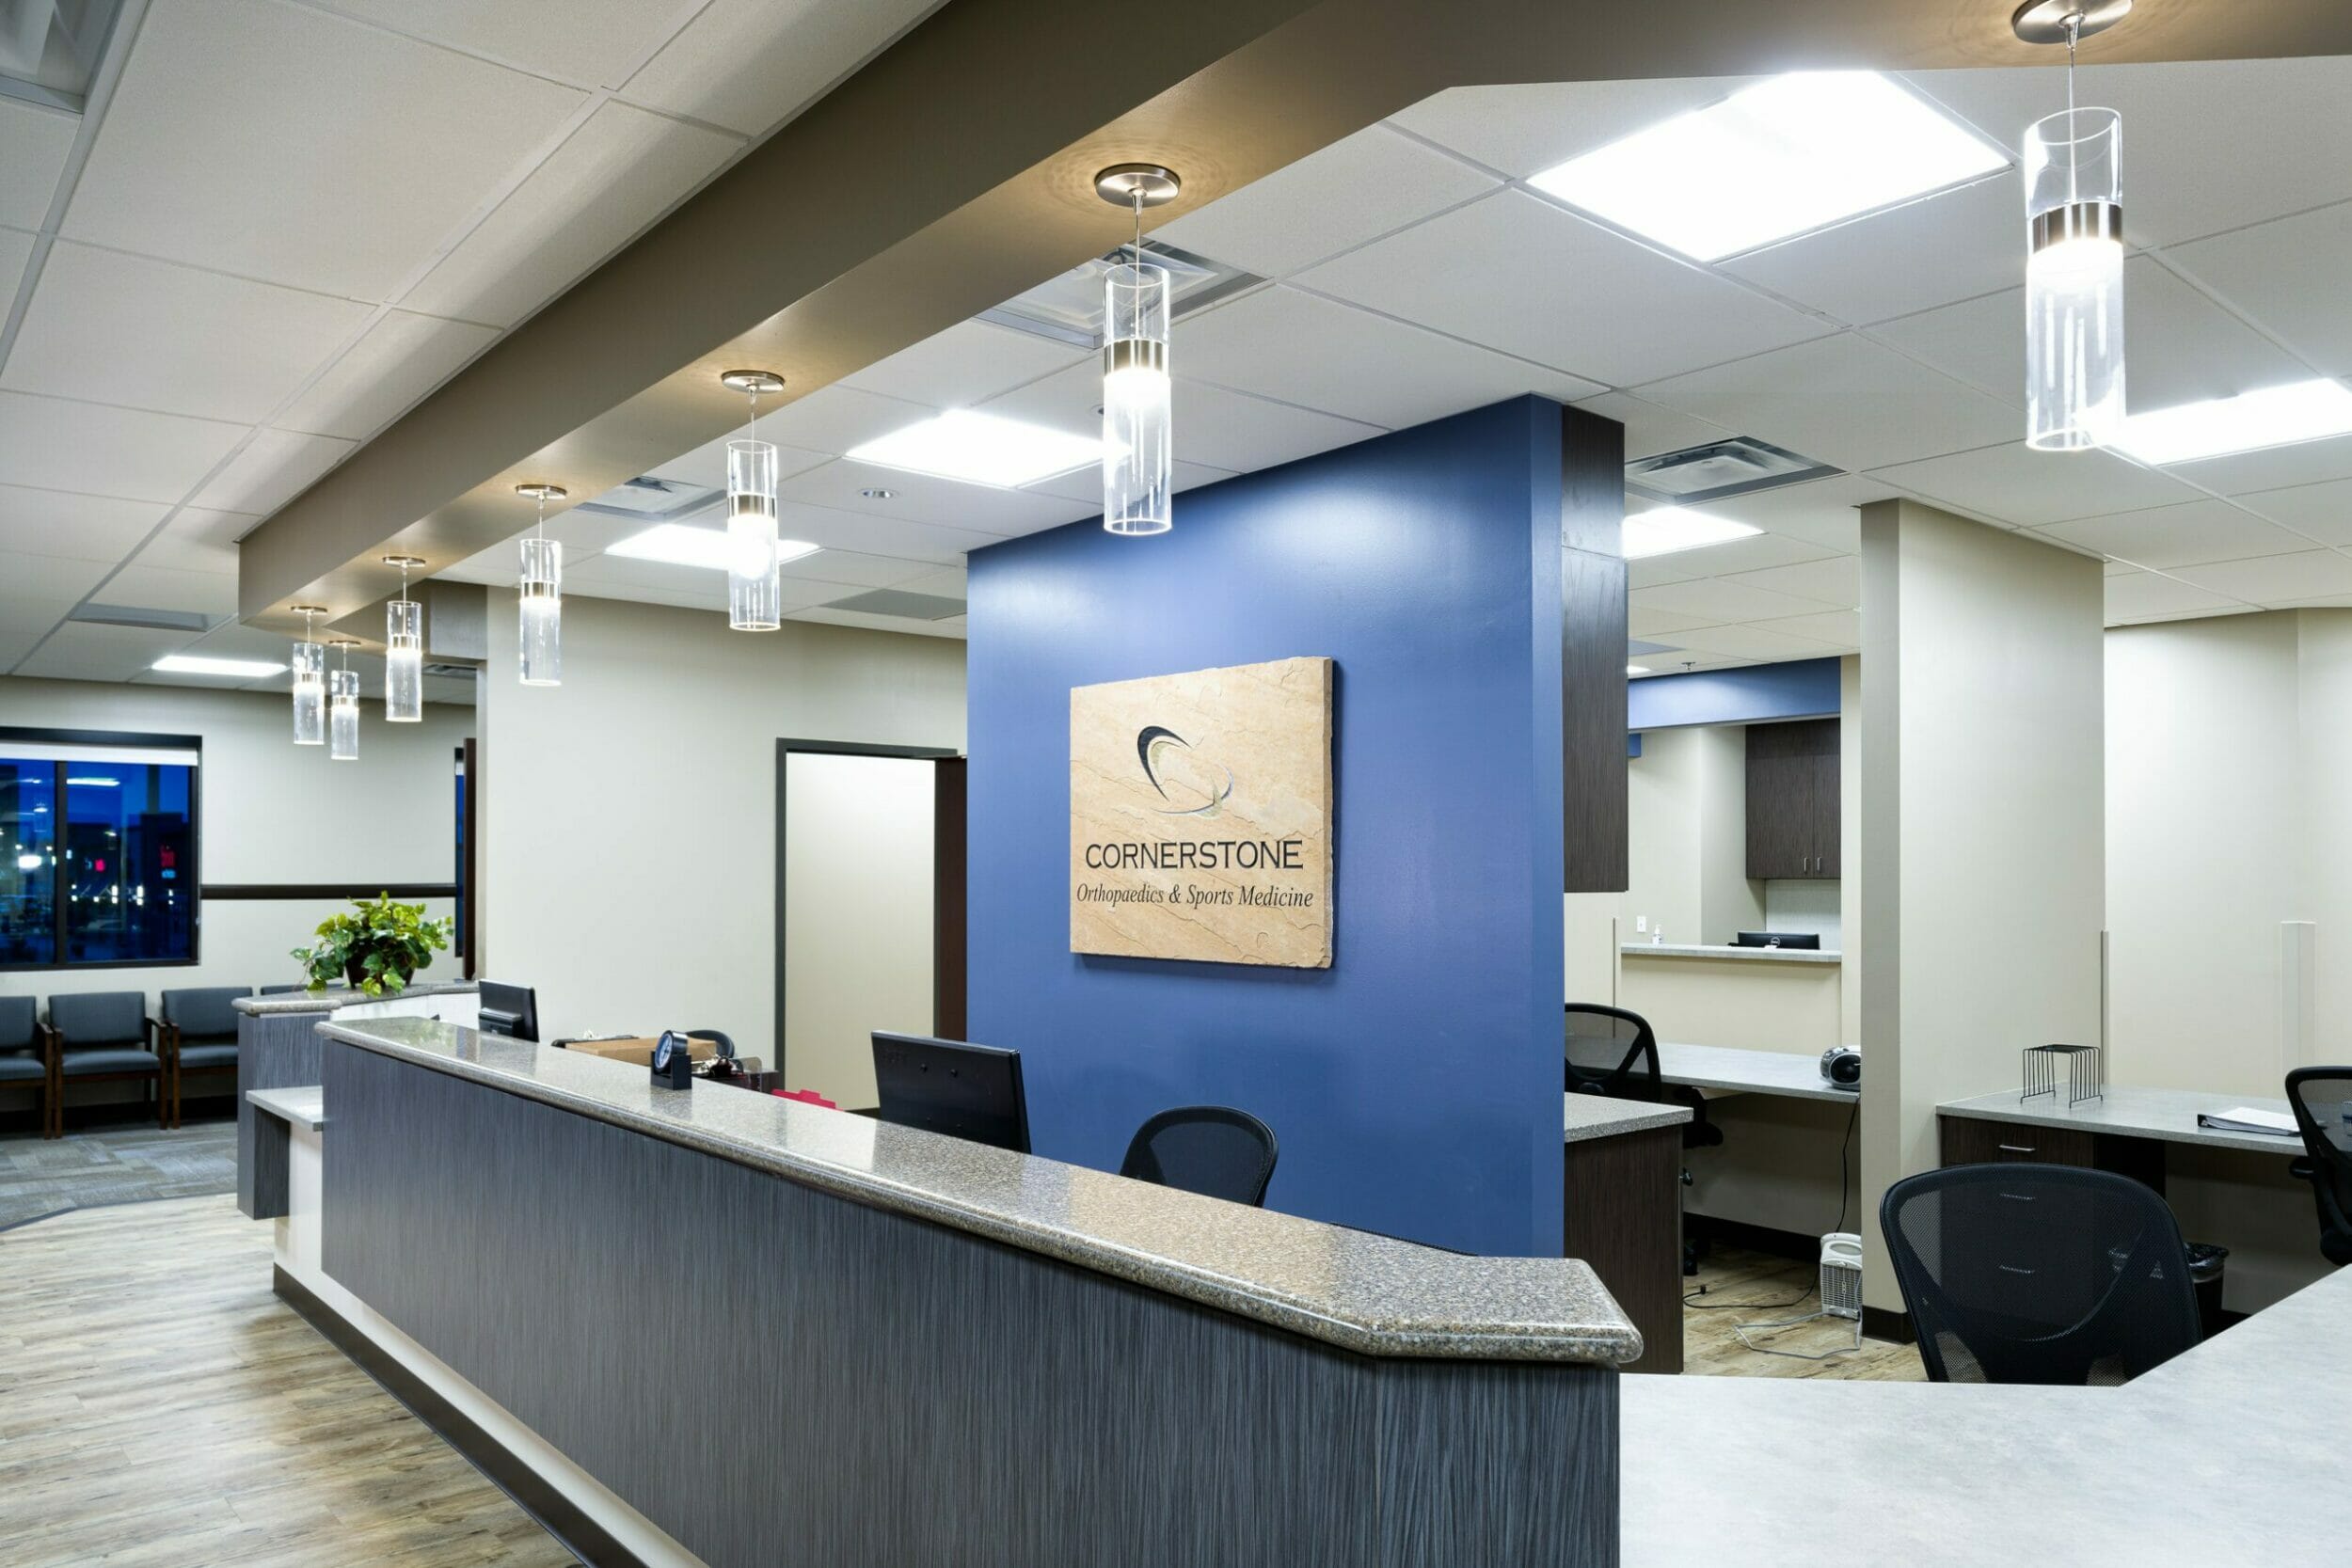 Front desk and lobby inside medical office building with wood and carpeted floors, a long front desk, and blue accents with the Cornerstone orthopedics and sports medicine sign behind the desk.